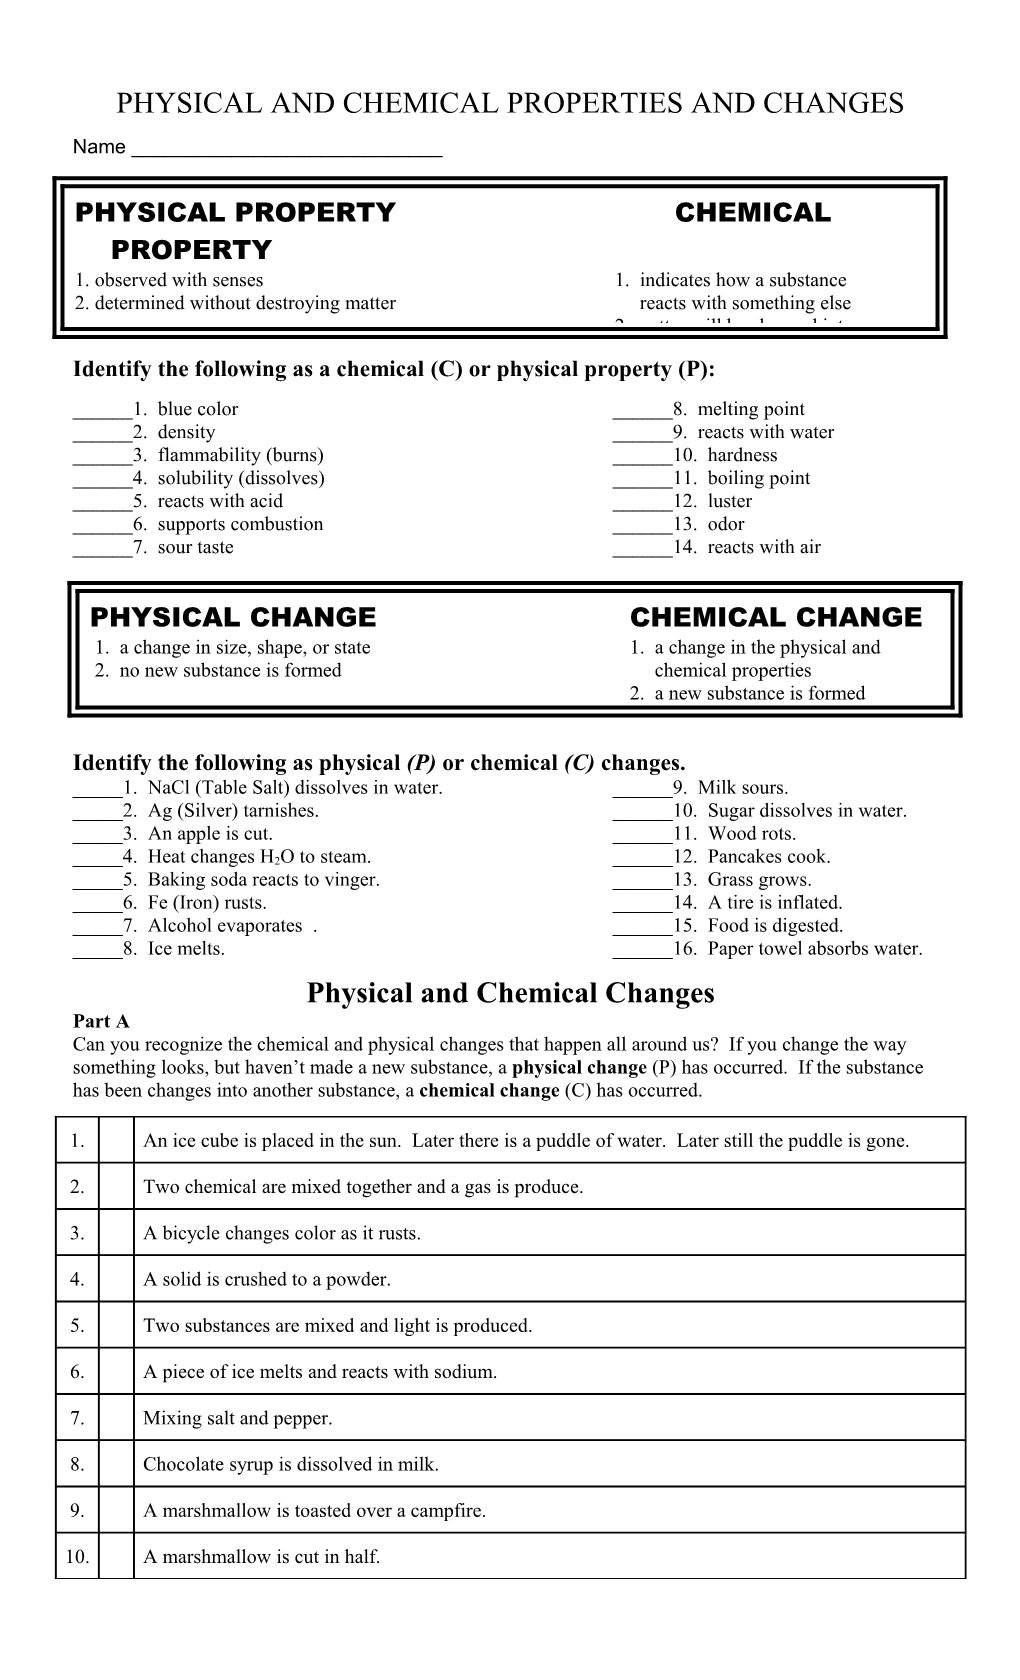 Physical and Chemical Changes Worksheet s1